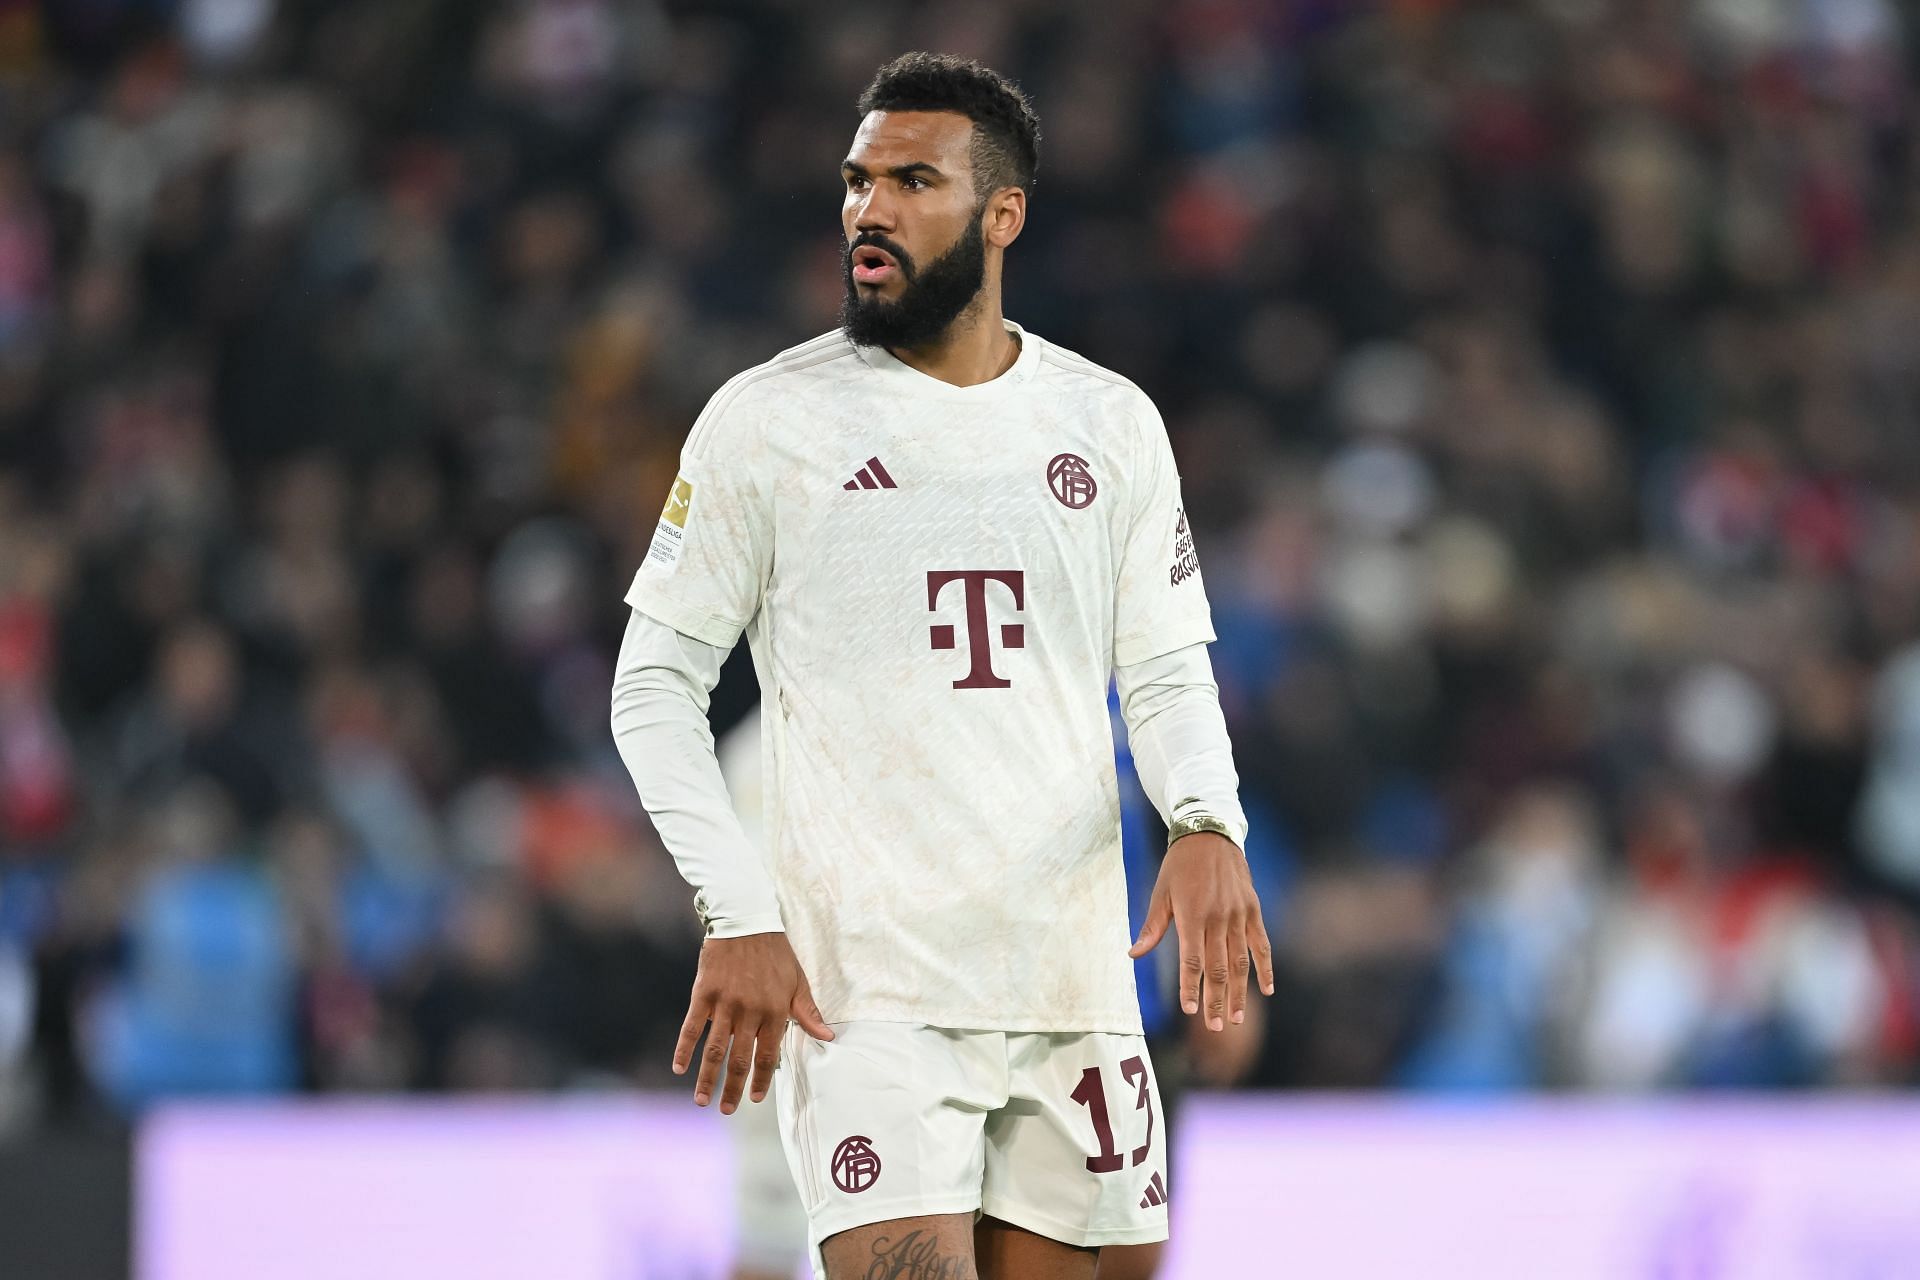 Eric Choupo-Moting could be on the move this month.